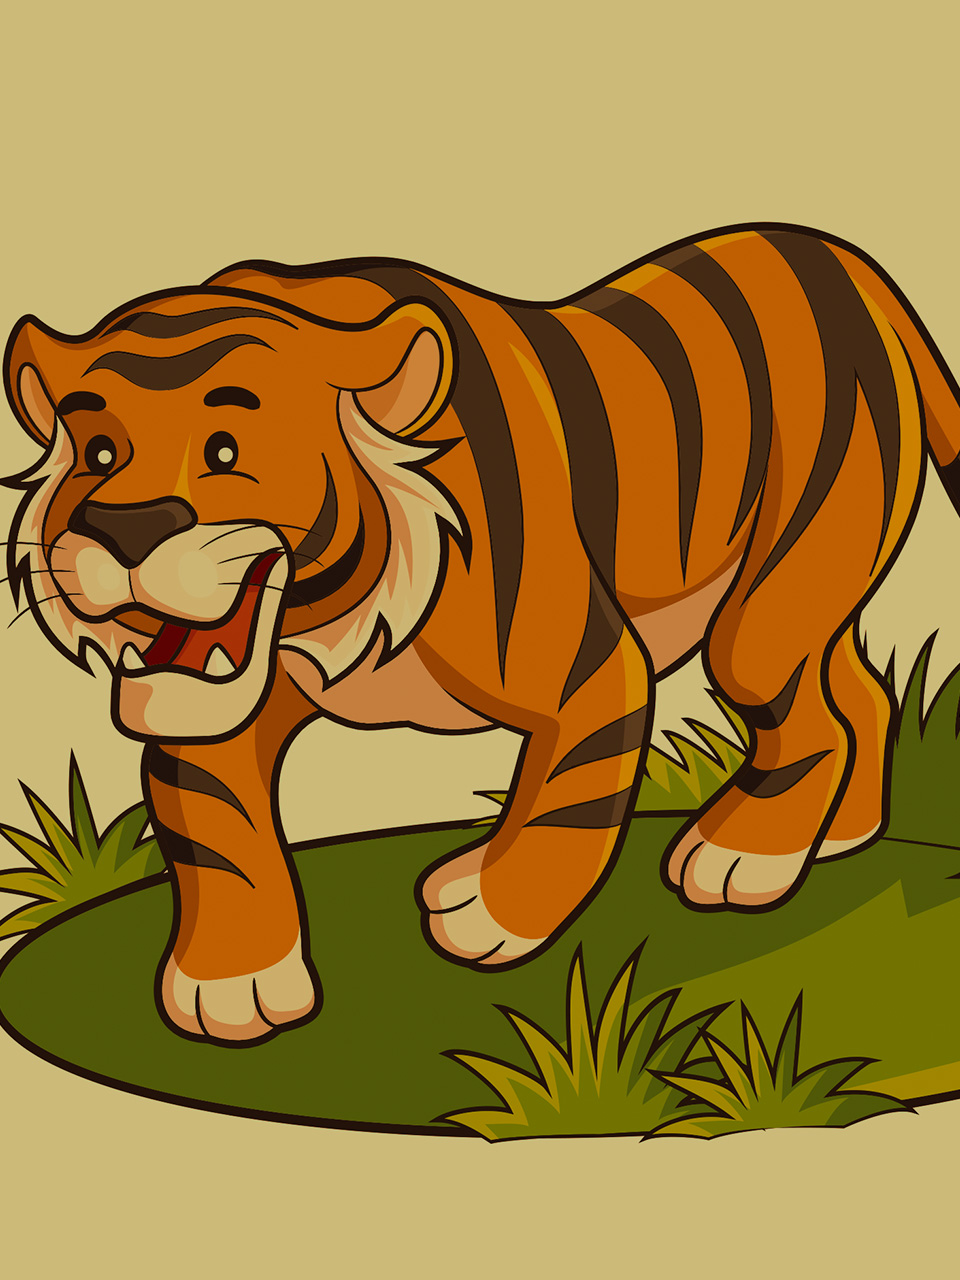 Step-by-step Instructions to Draw a Cartoon Tiger